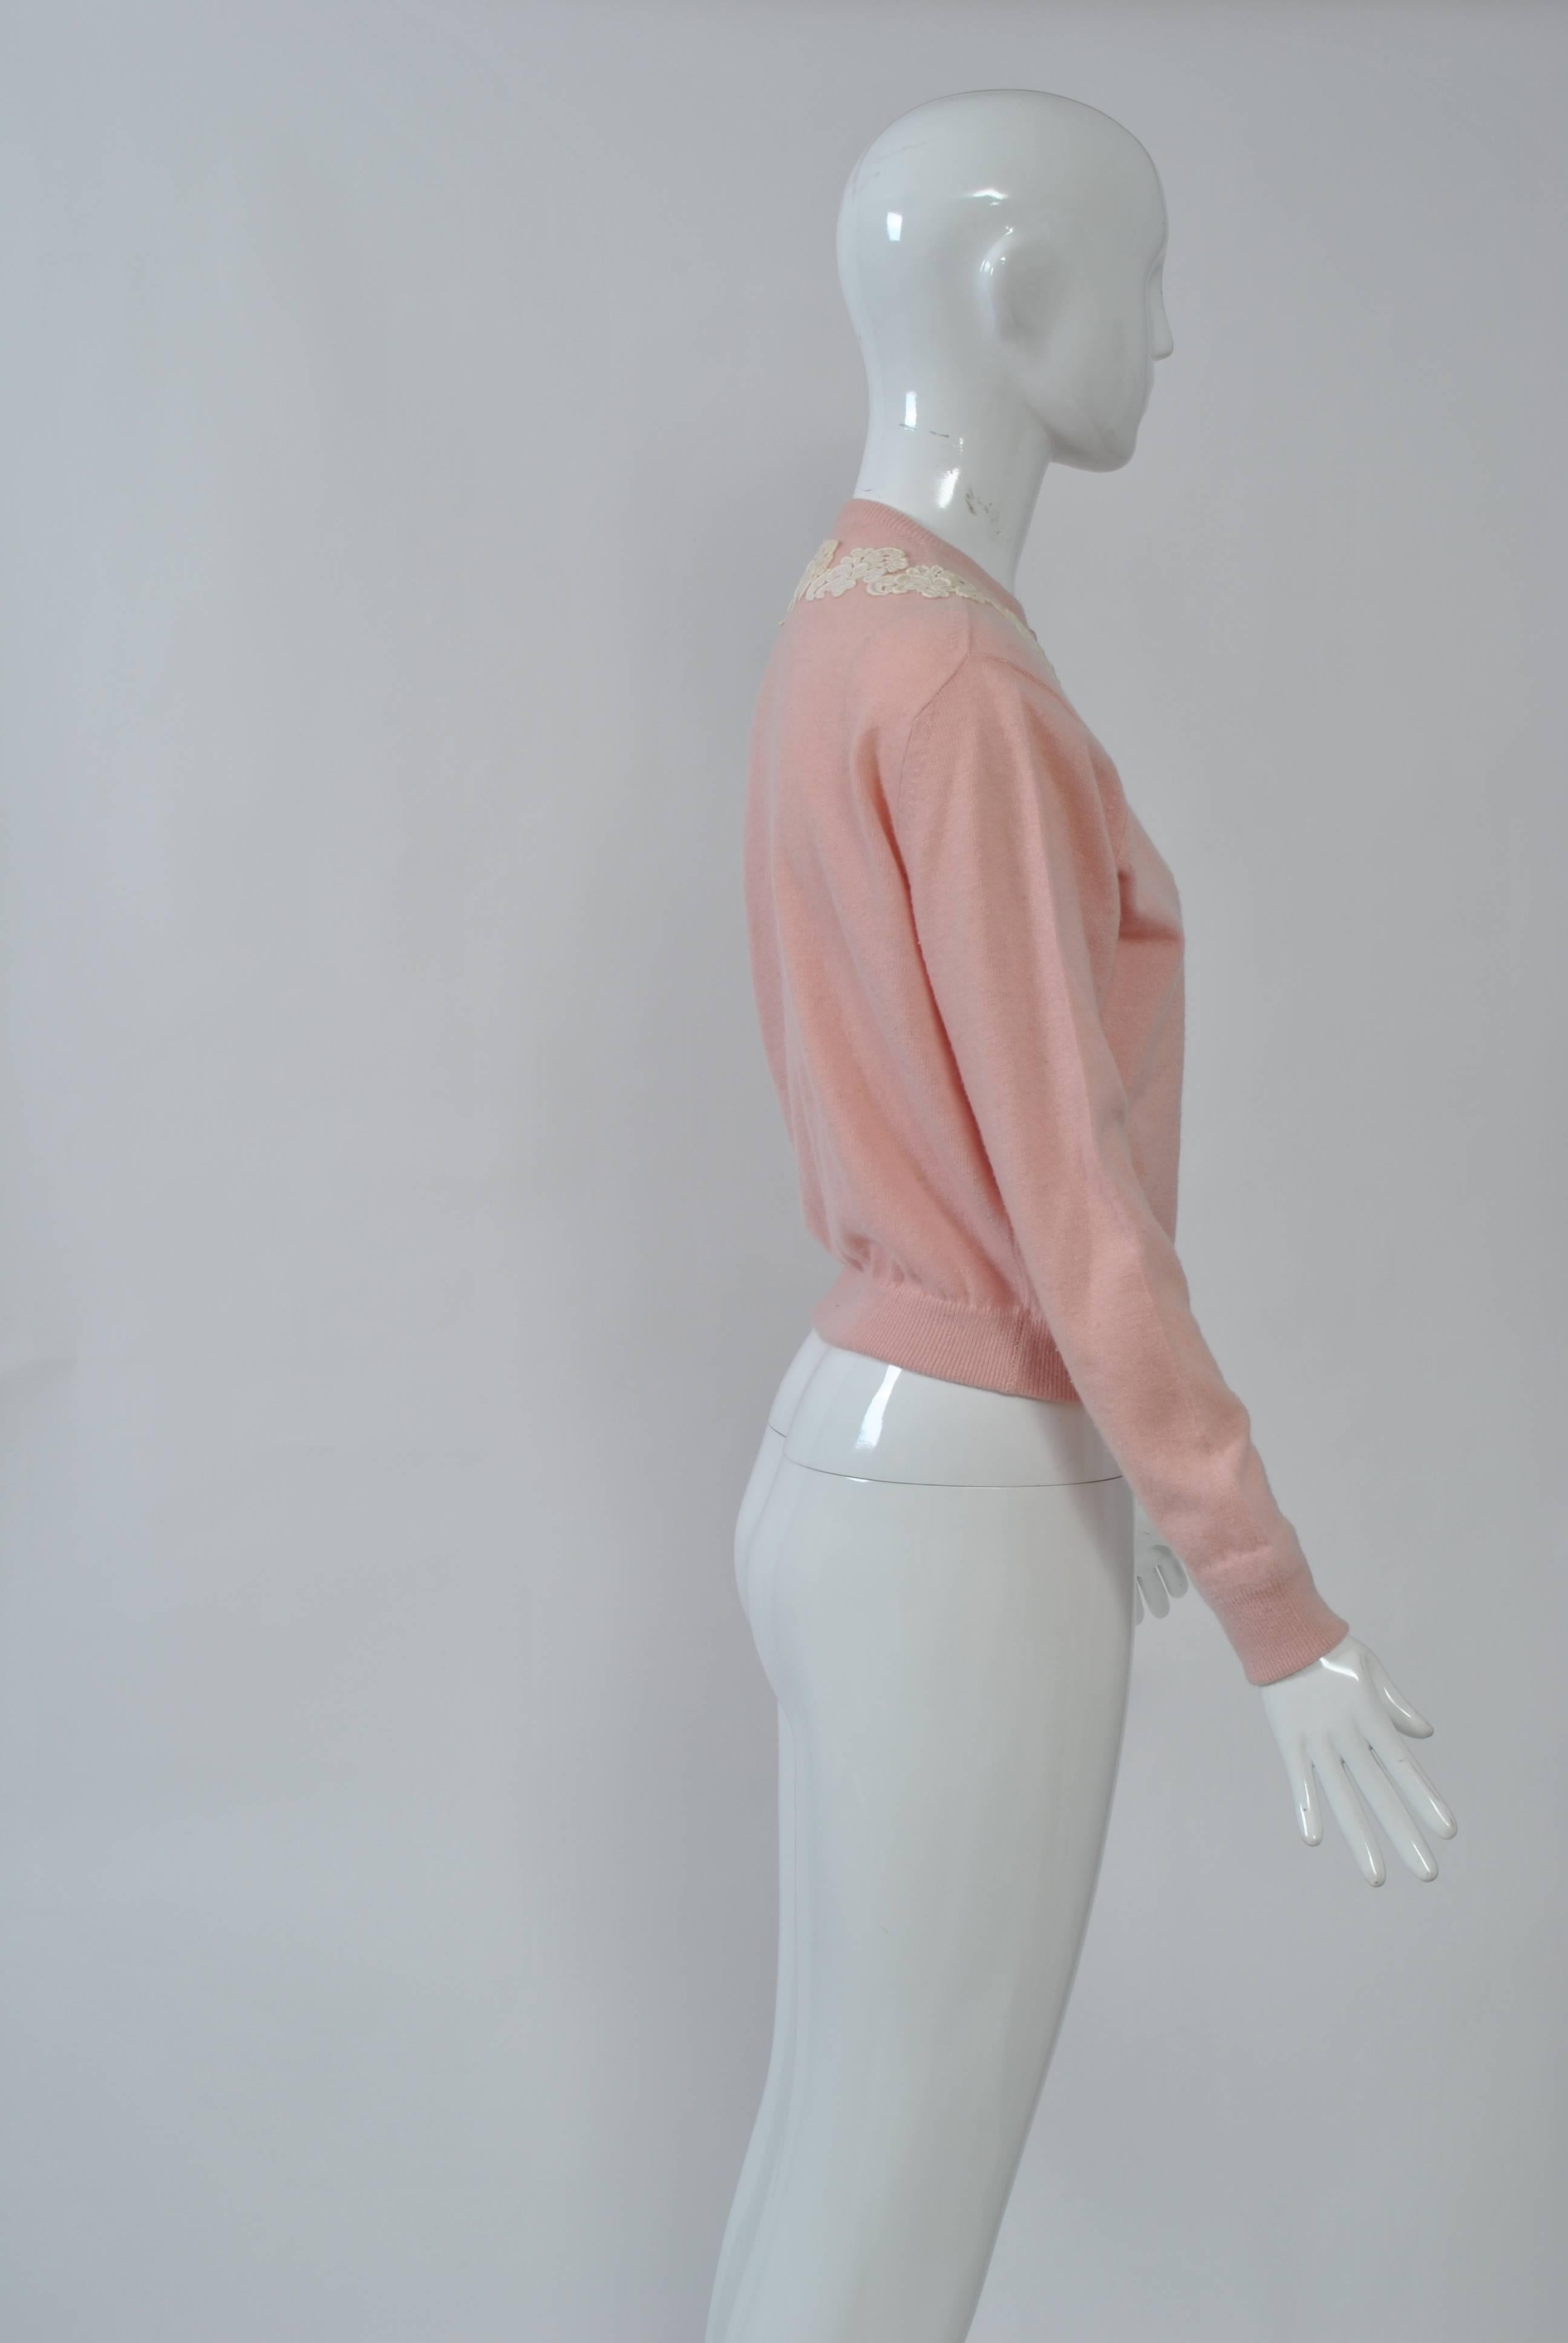 This pink cashmere cardigan with lace appliqués around the neckline and halfway down the front is an example of the decorated sweaters popular during the 1950s and '60s. Unlined. Retailed by Bonwit Teller. Size S.